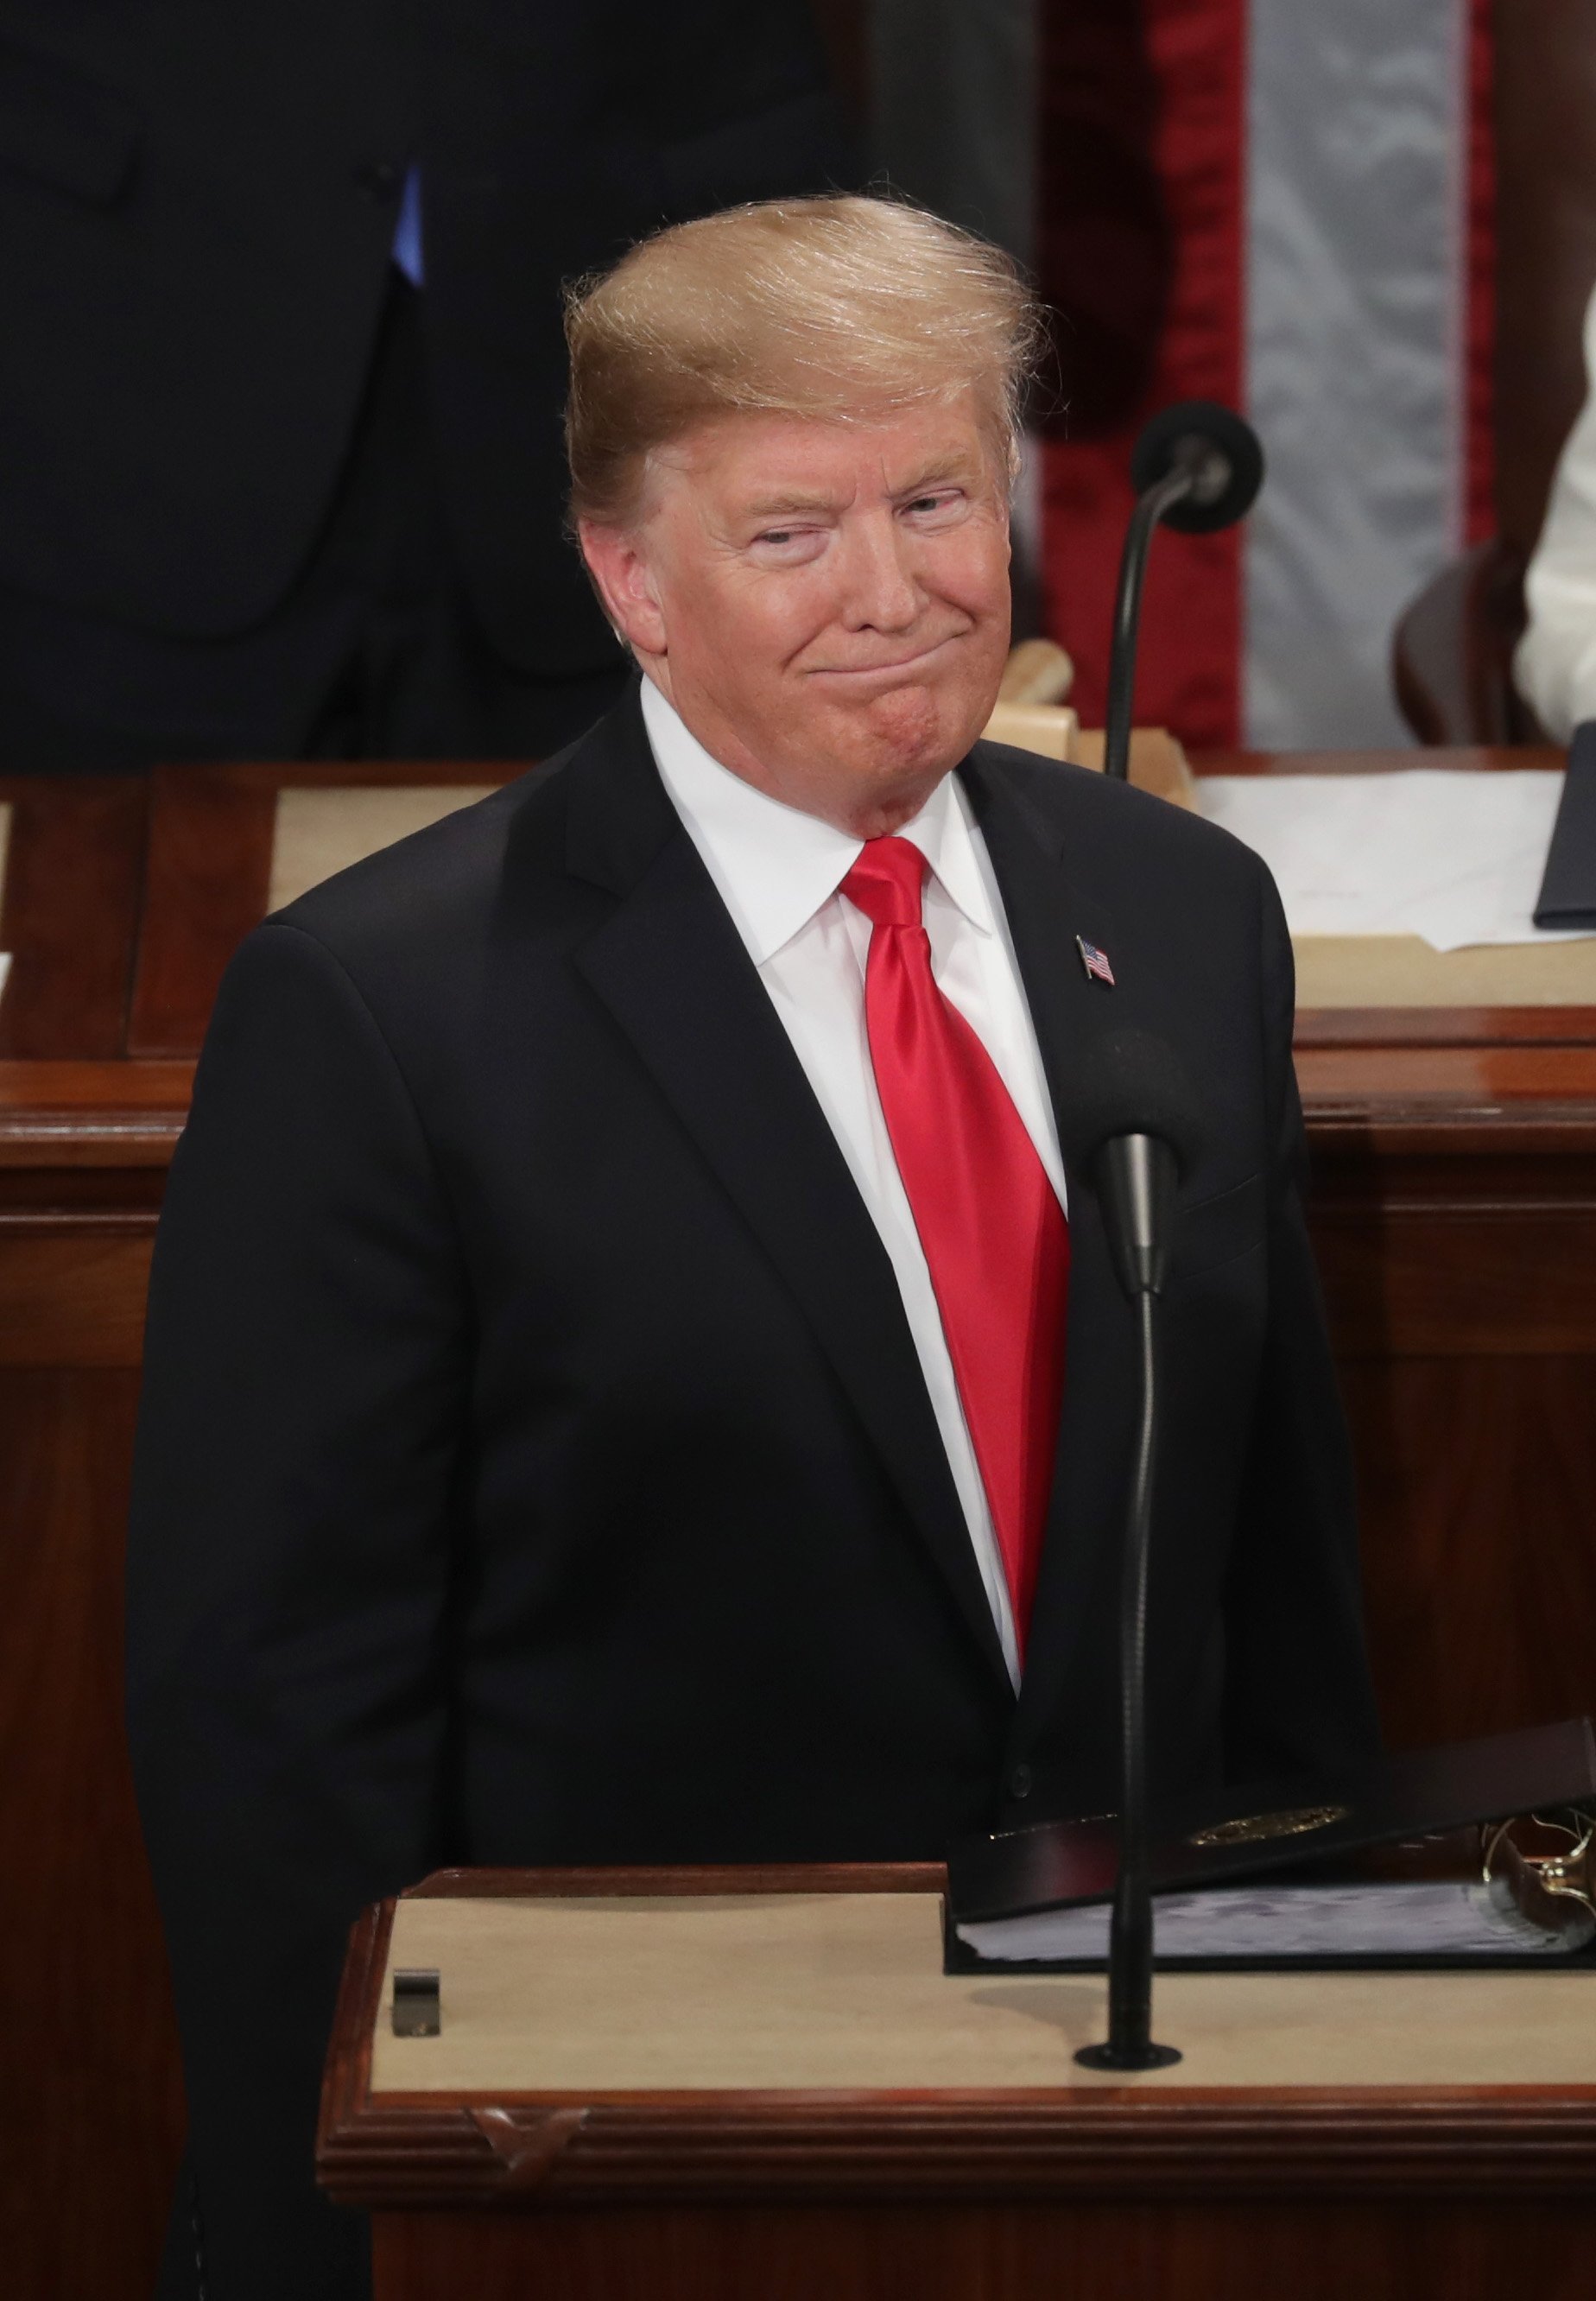 President Donald Trump during the 2019 State of the Union adress | Photo: Getty Images